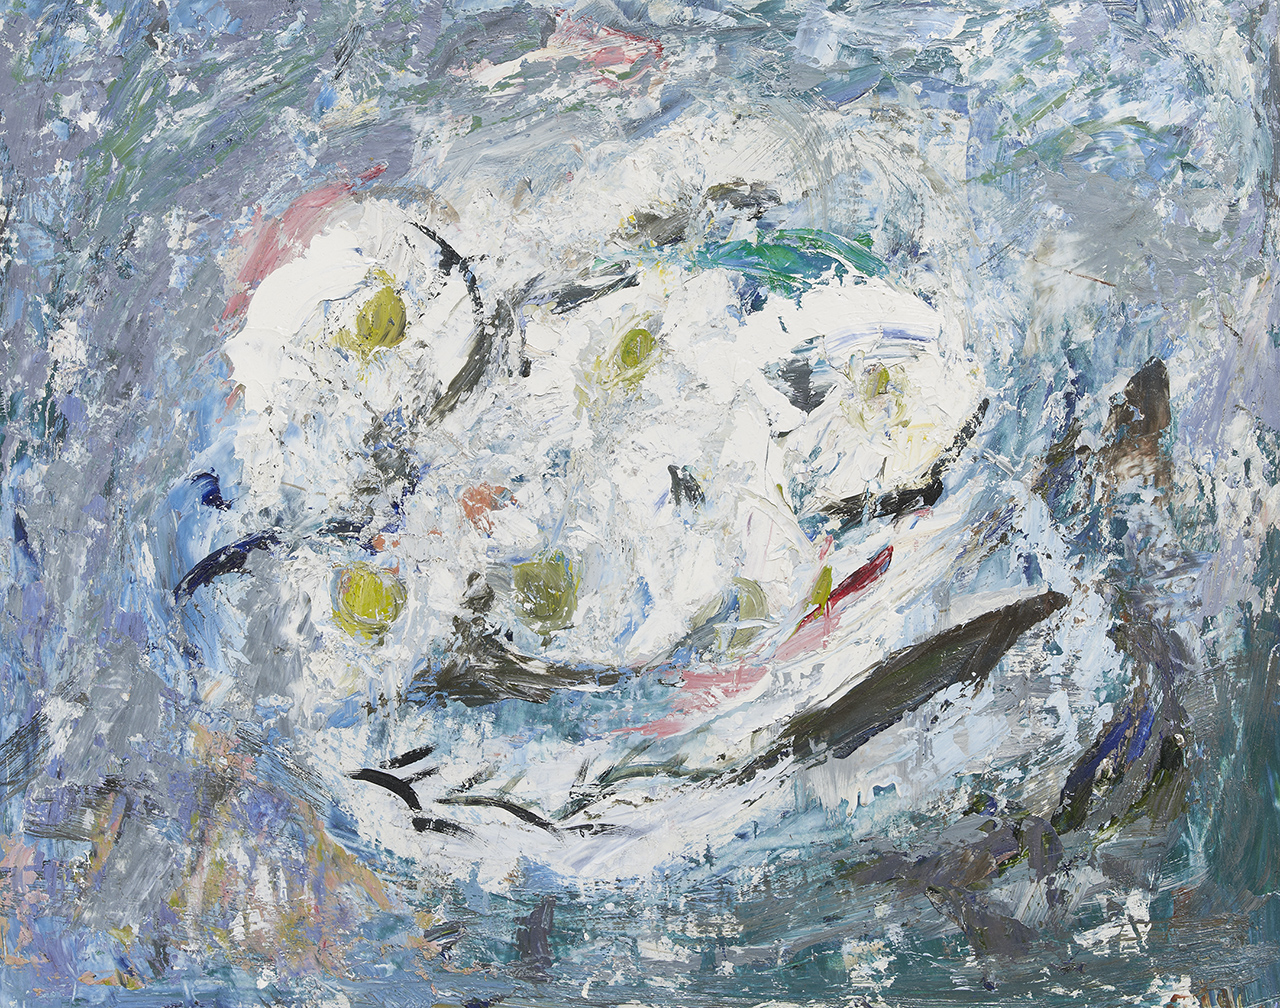 Abstract painting of a still life, in blues and whites with some small hints of yellow and pink